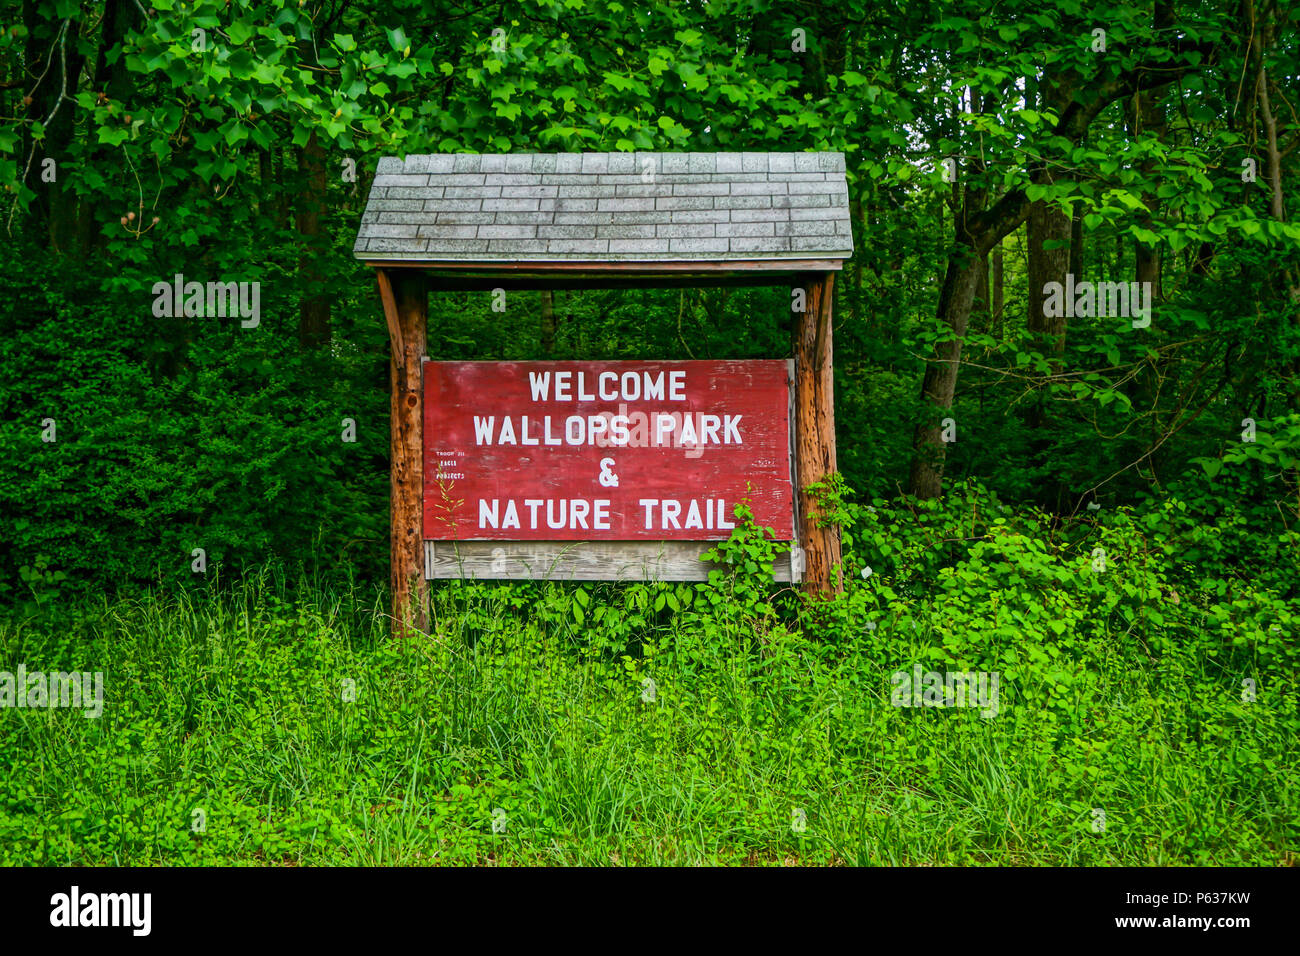 Wallops Island, Virginia, USA: A sign welcomes visitors to the Wallops Park and Nature Trail. Stock Photo